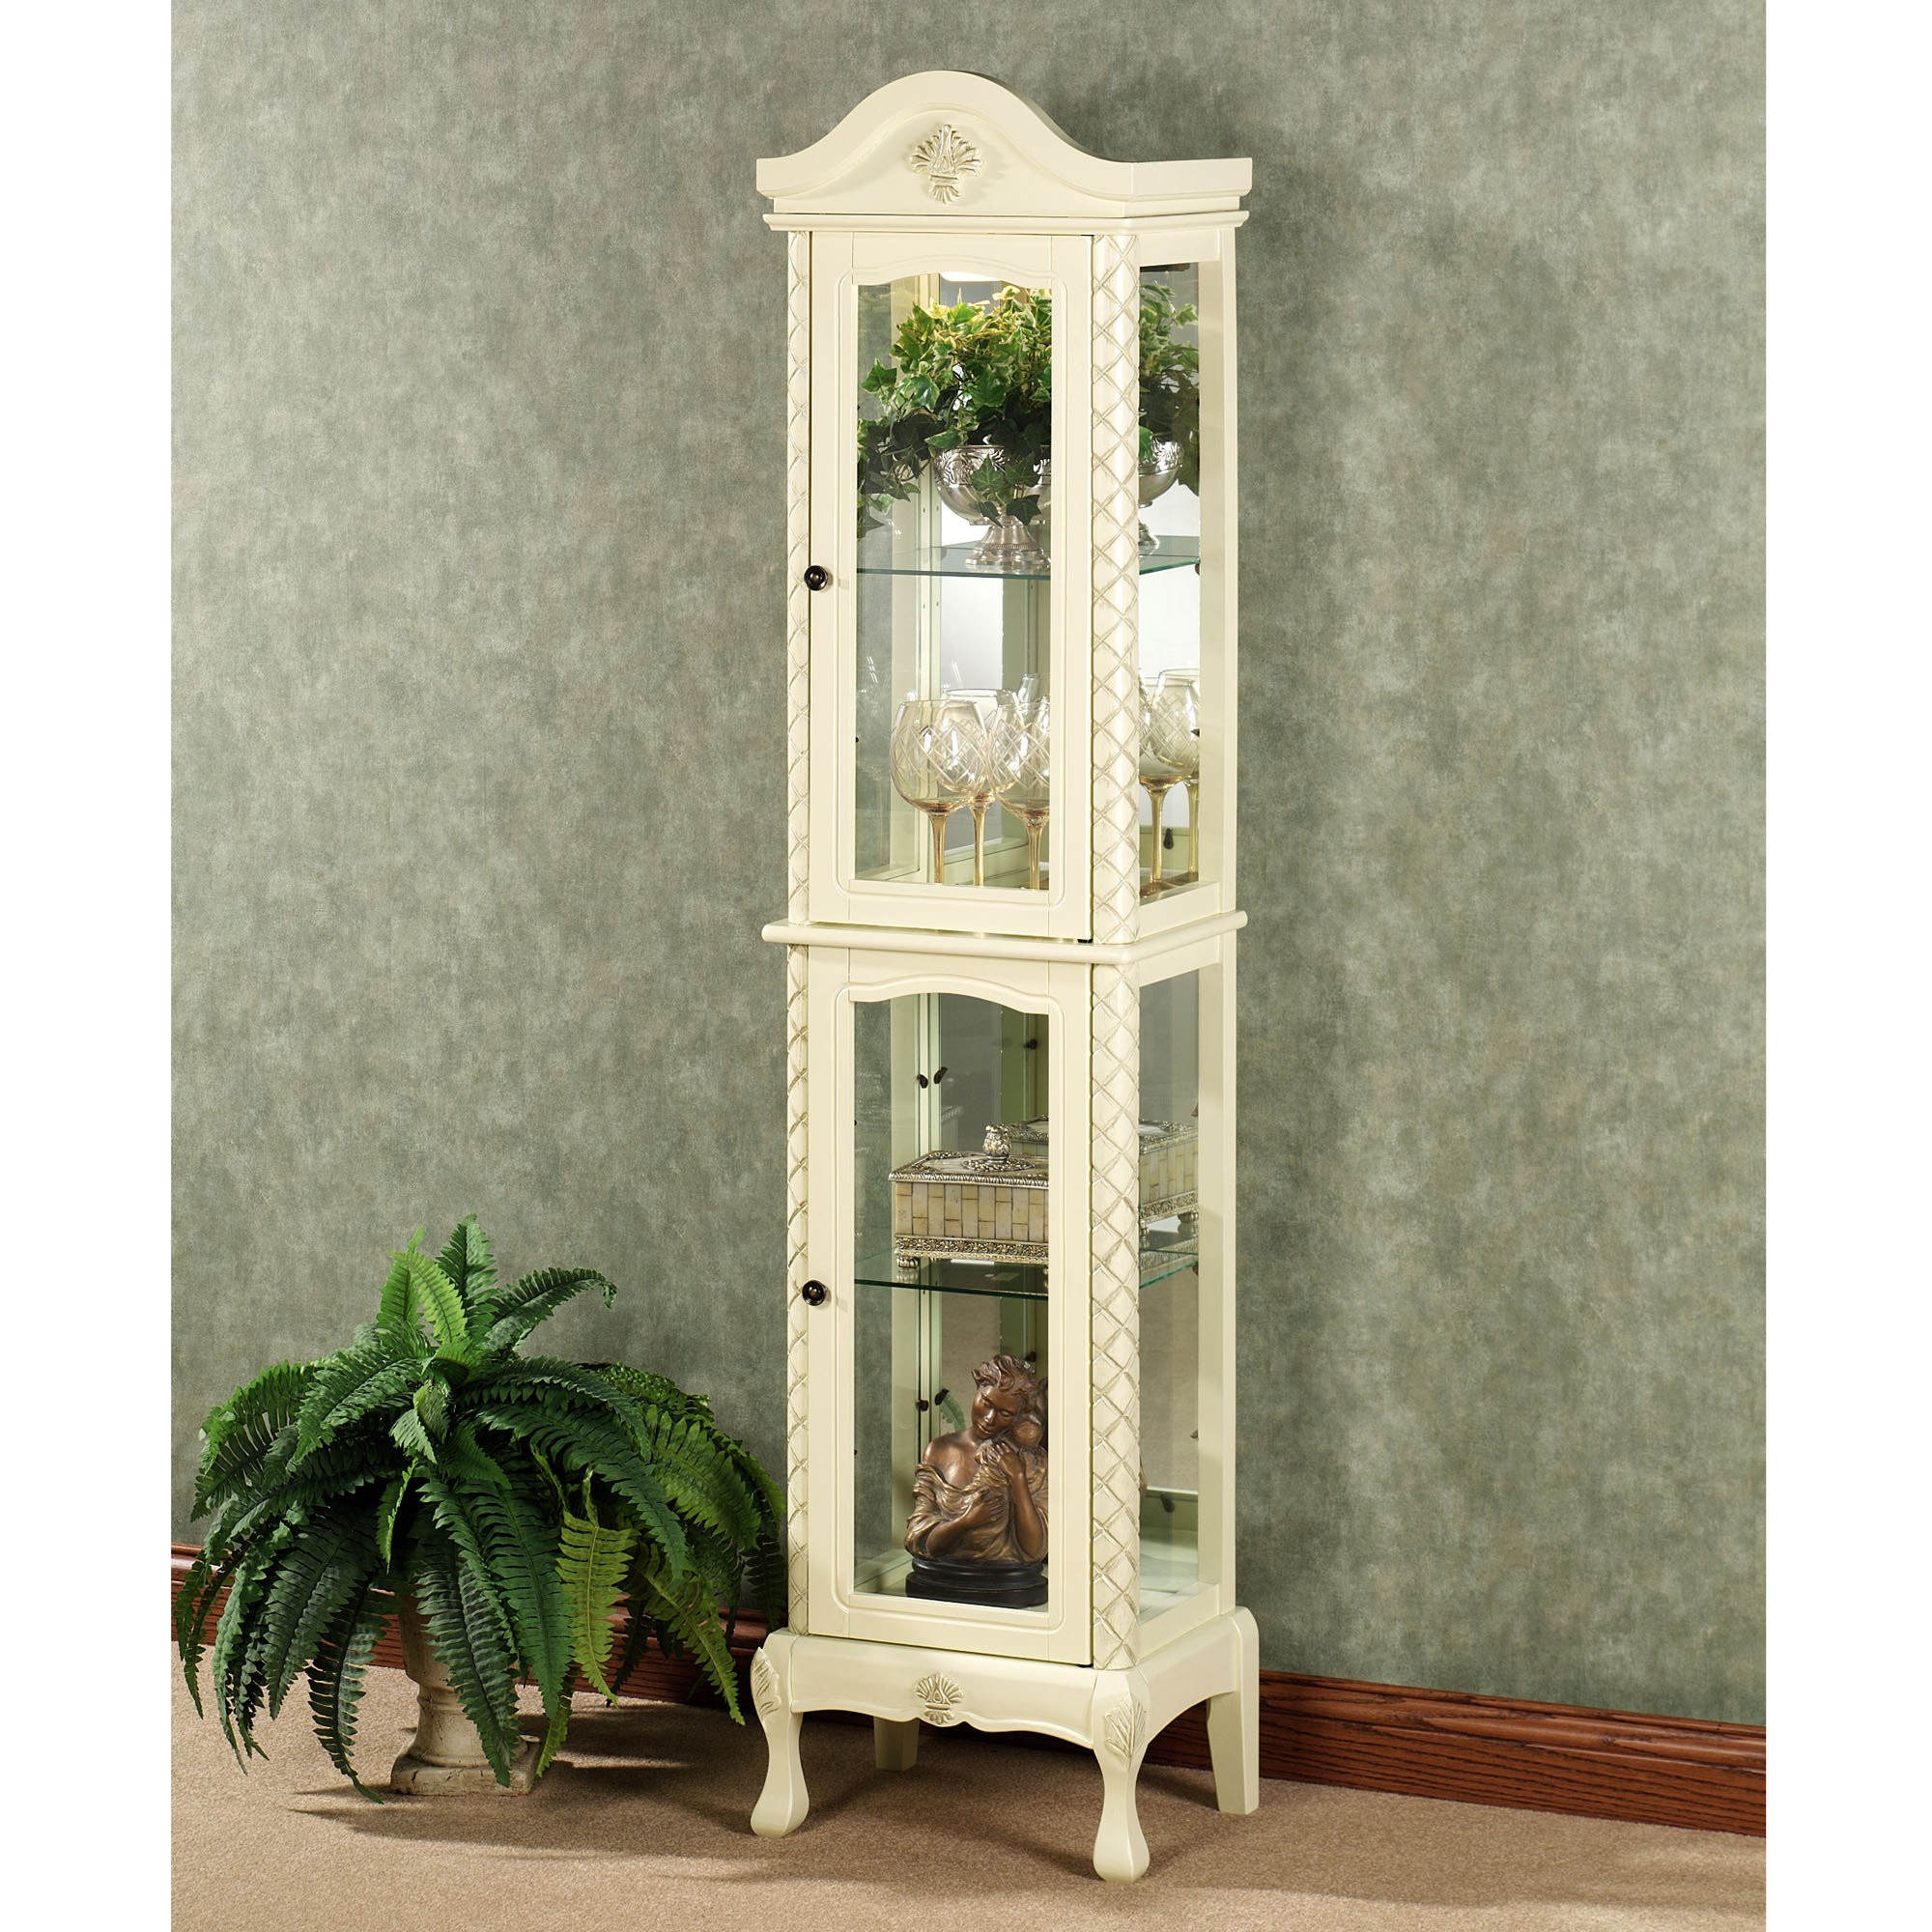 Corner curio cabinet for clearance belezaa decorations